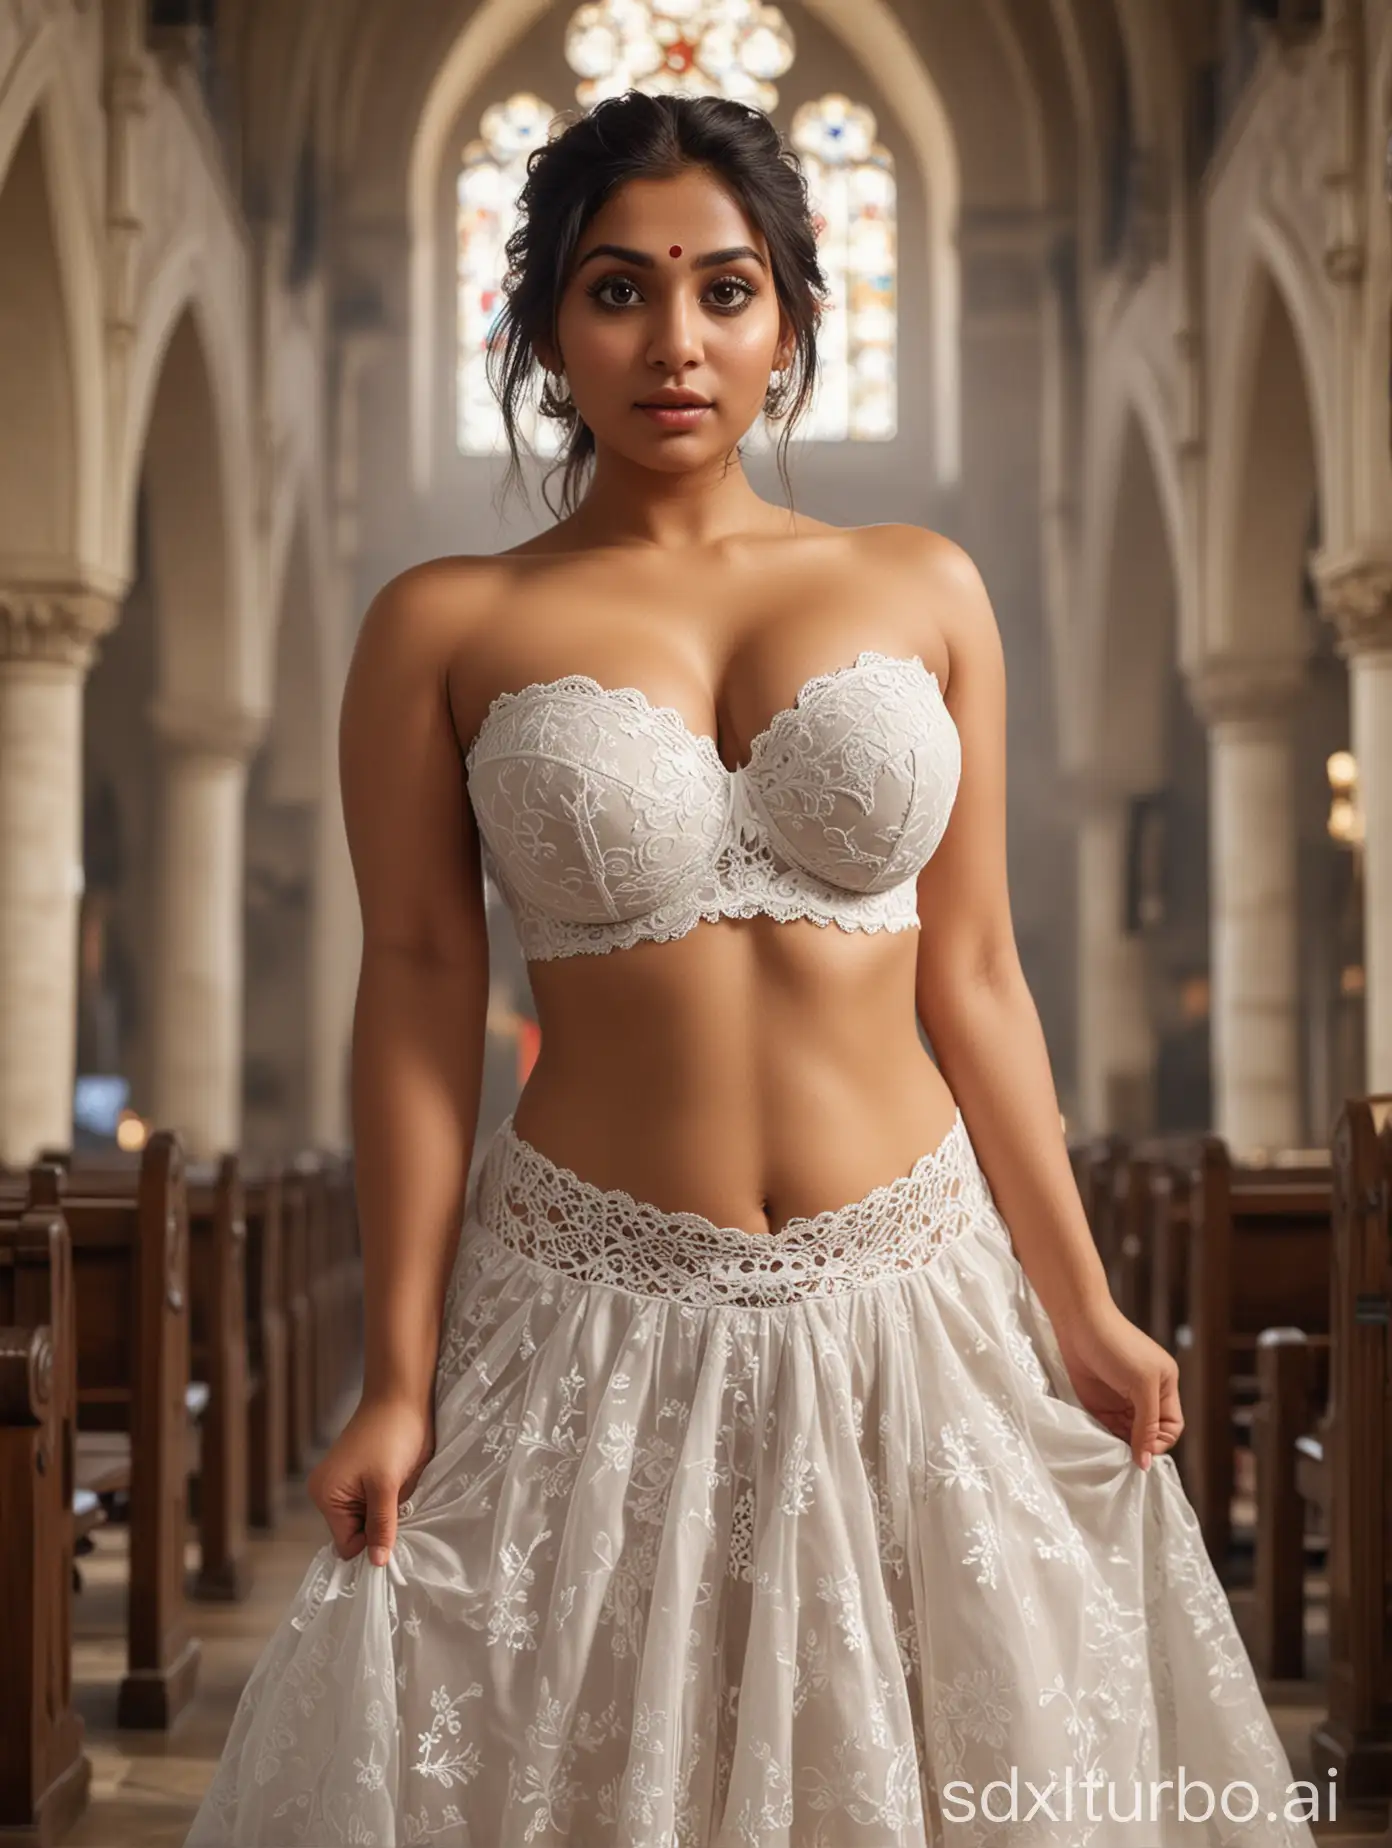 CURVY Indian woman with large breasts and flat abdomen, with hair bun, with Plump female body, with white lace strapless bra with deep cleavage and transparent lace long skirt, she has a busty body, is standing in a crowded church. big eyes, perfect wine eyes, fantastic face, beautiful appearance, detailed elegance, blurred background, ultra focus, face illuminated, face detailed, 16k resolution, full body view